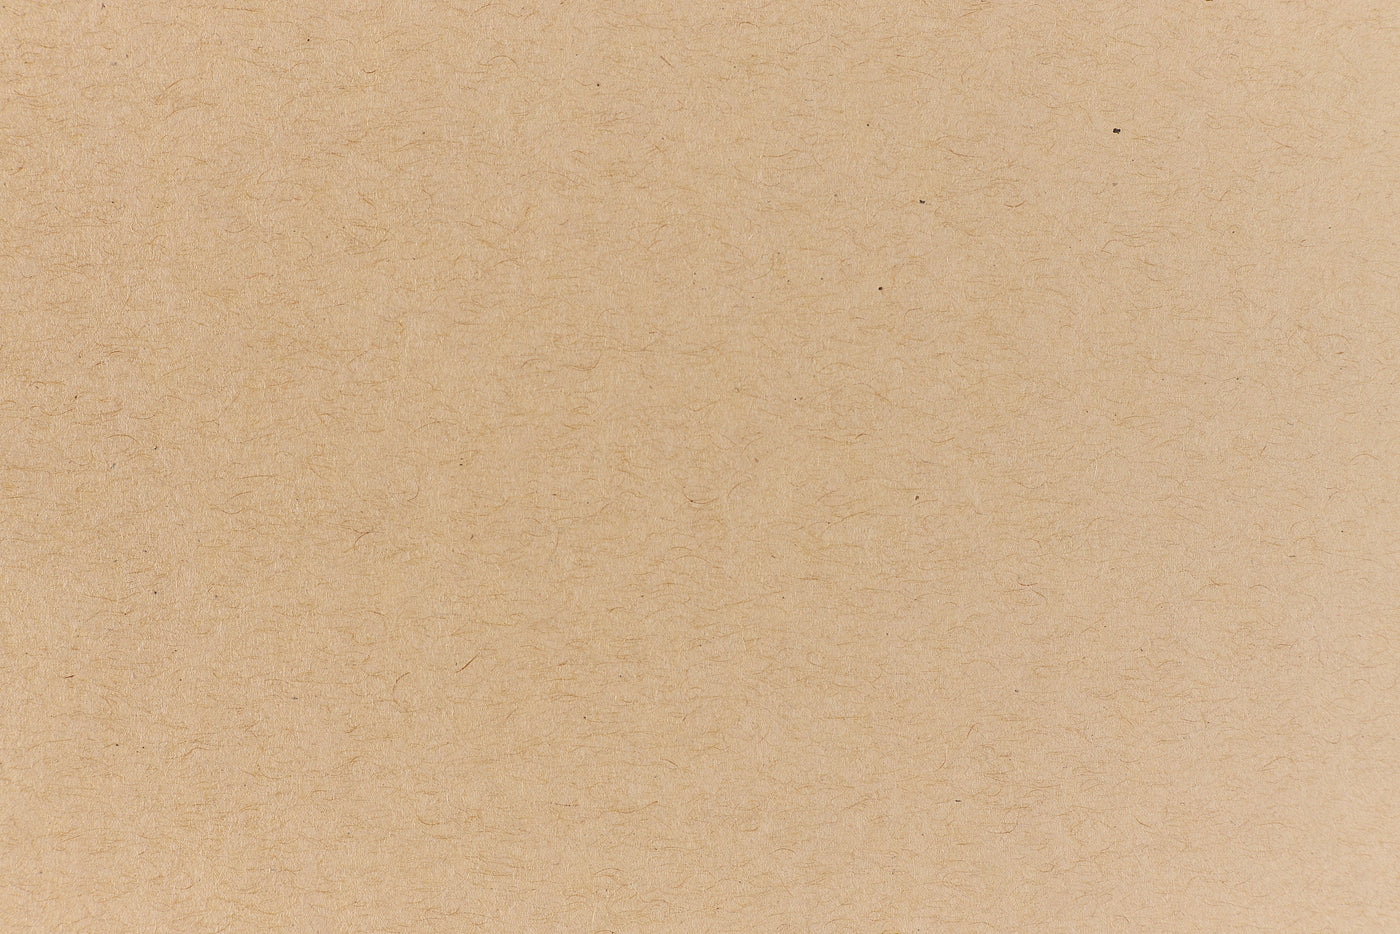 Aged Parchment Cardstock - Tan Cover Weight Paper - Parchtone – French Paper